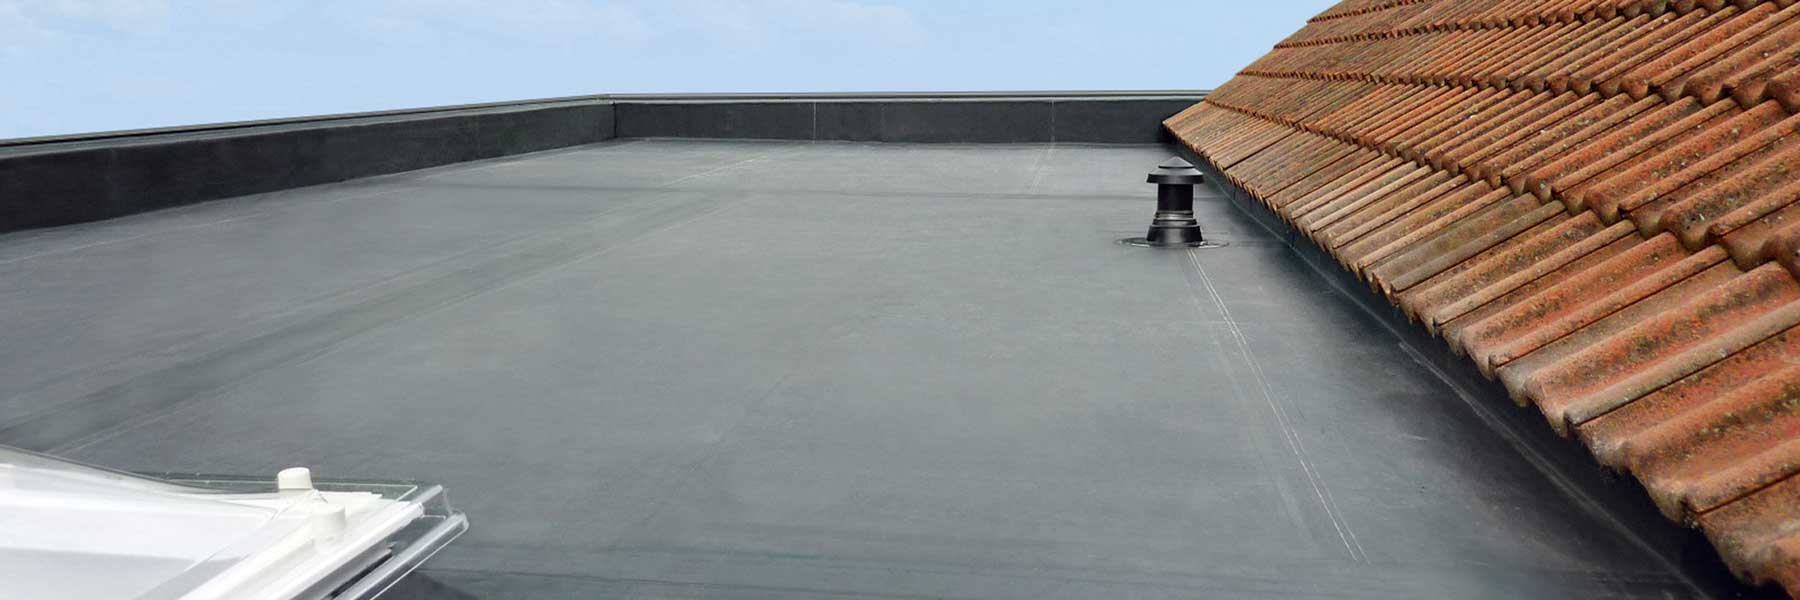 Key West Safety Surfacing-EPDM Rubber